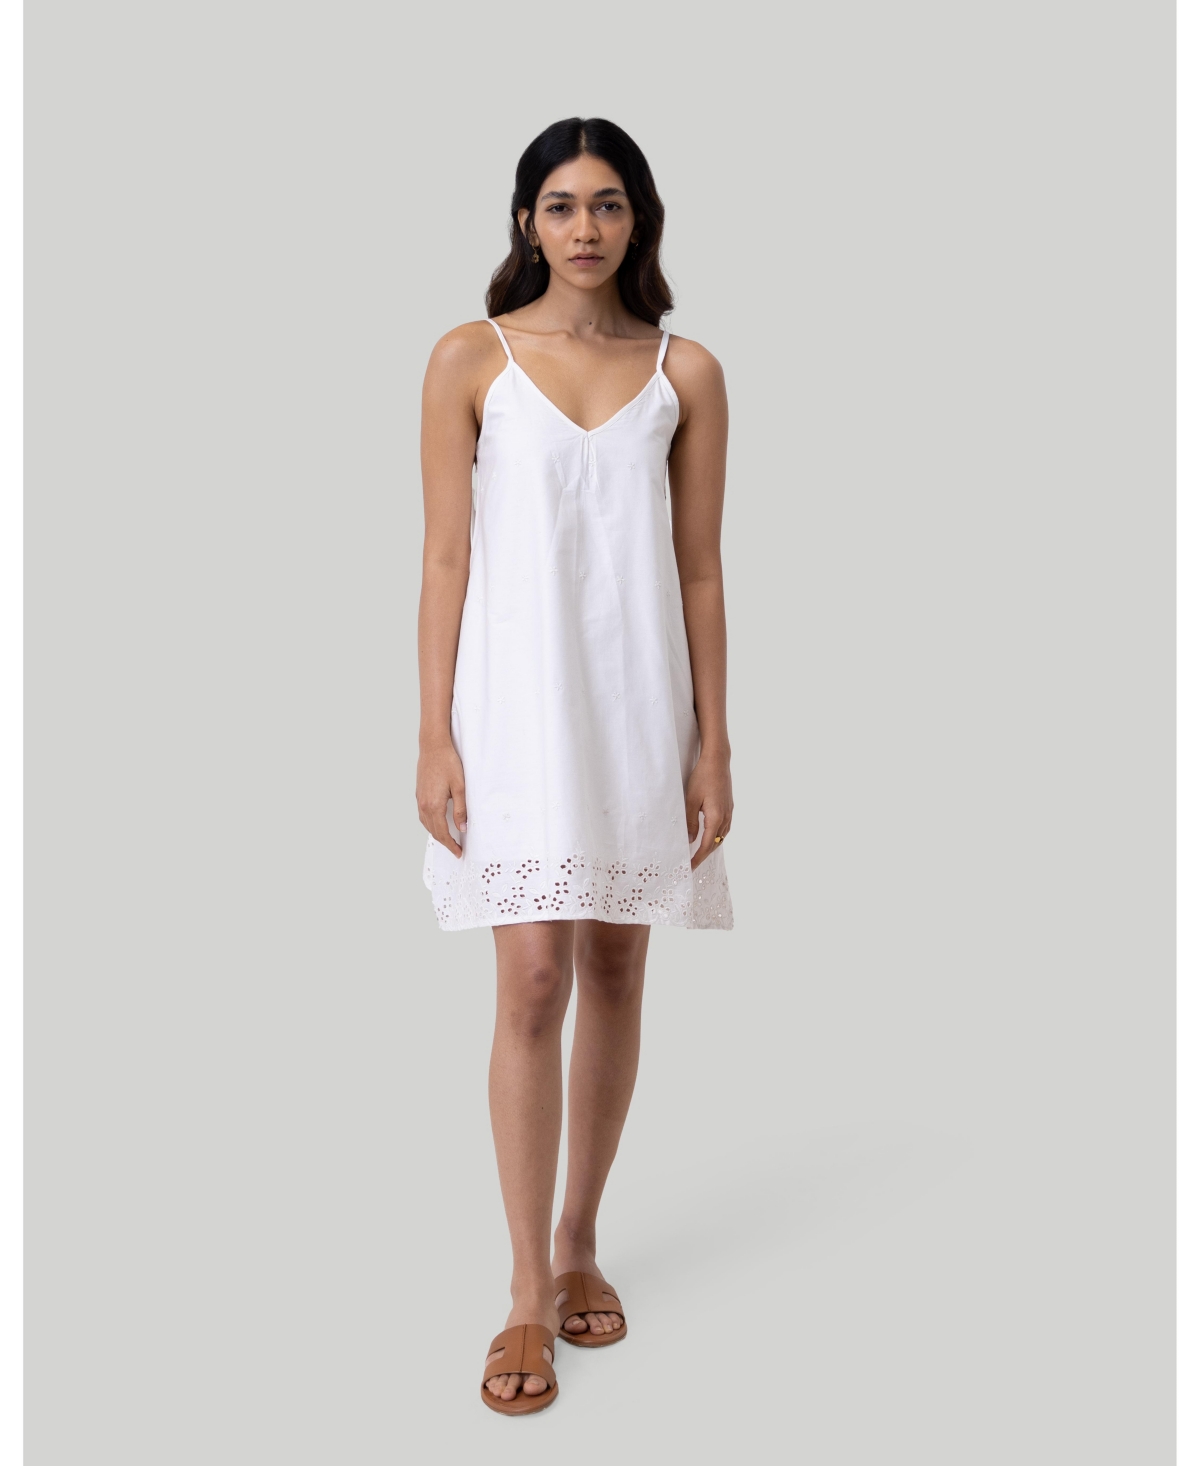 Women's Short Tent Dress with back tie - White